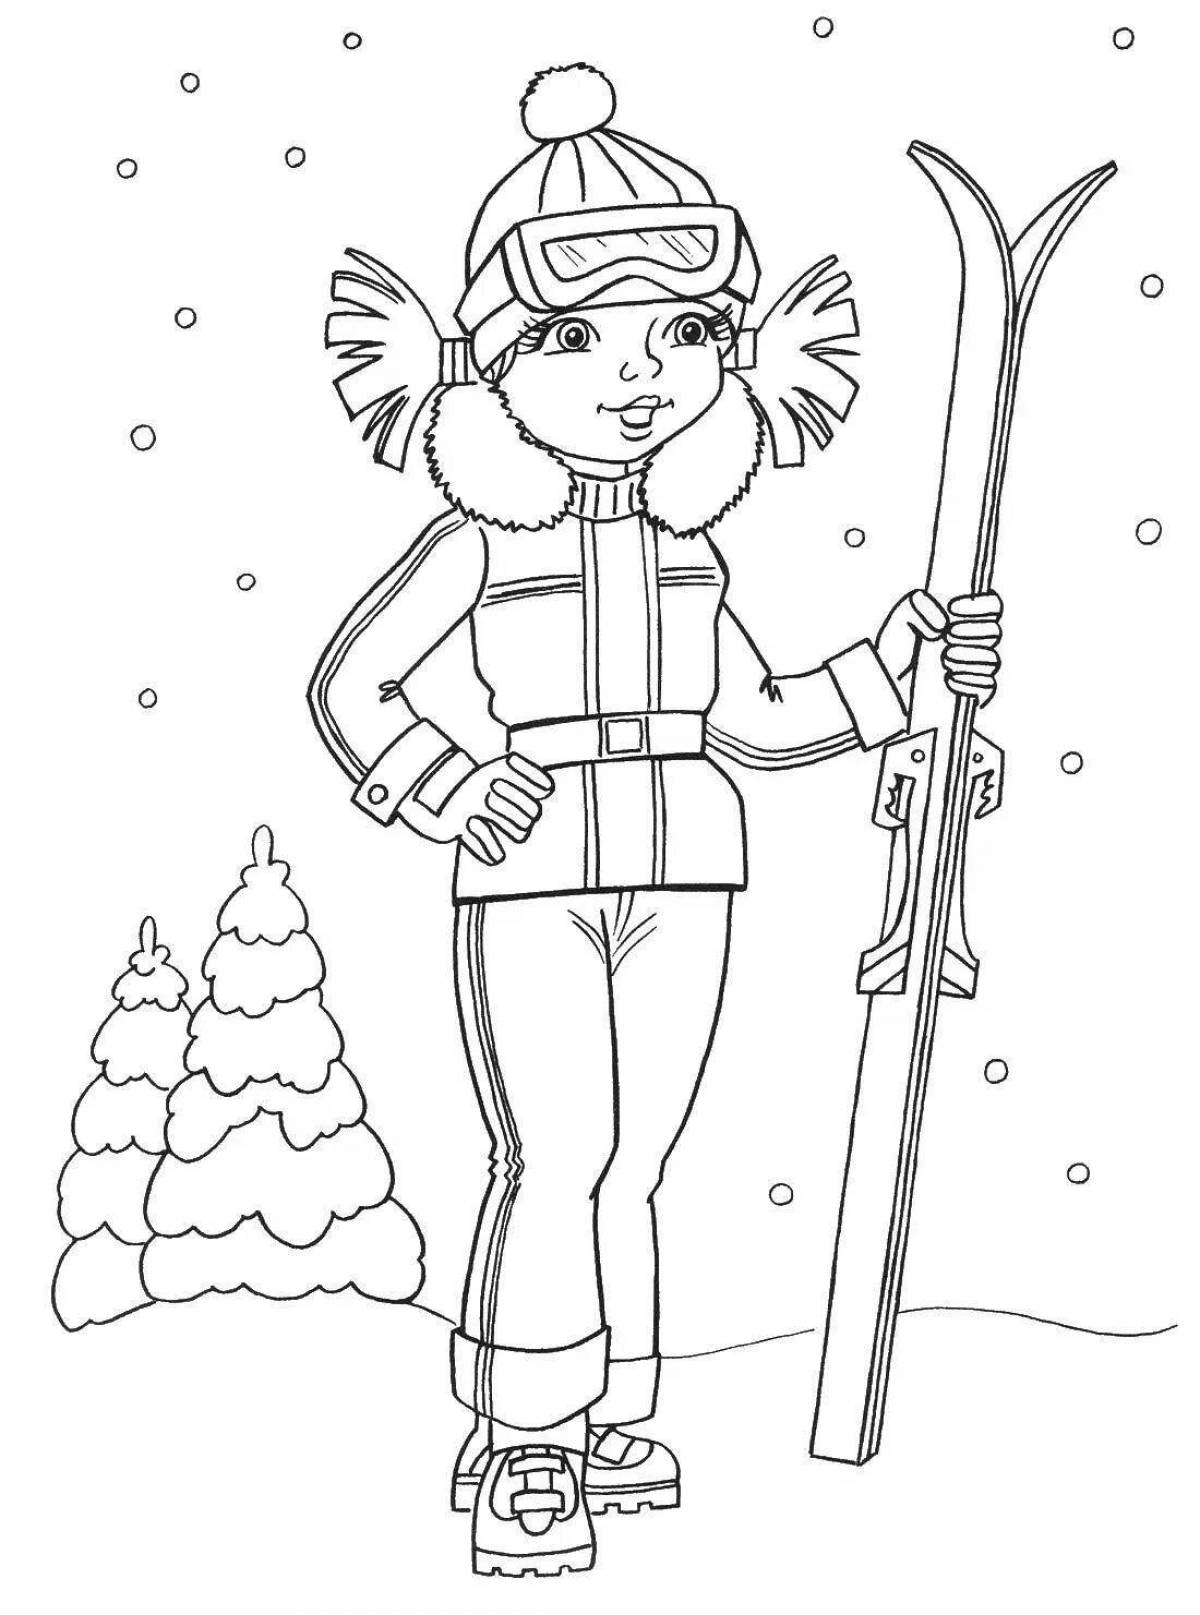 Colorful family skiing coloring book